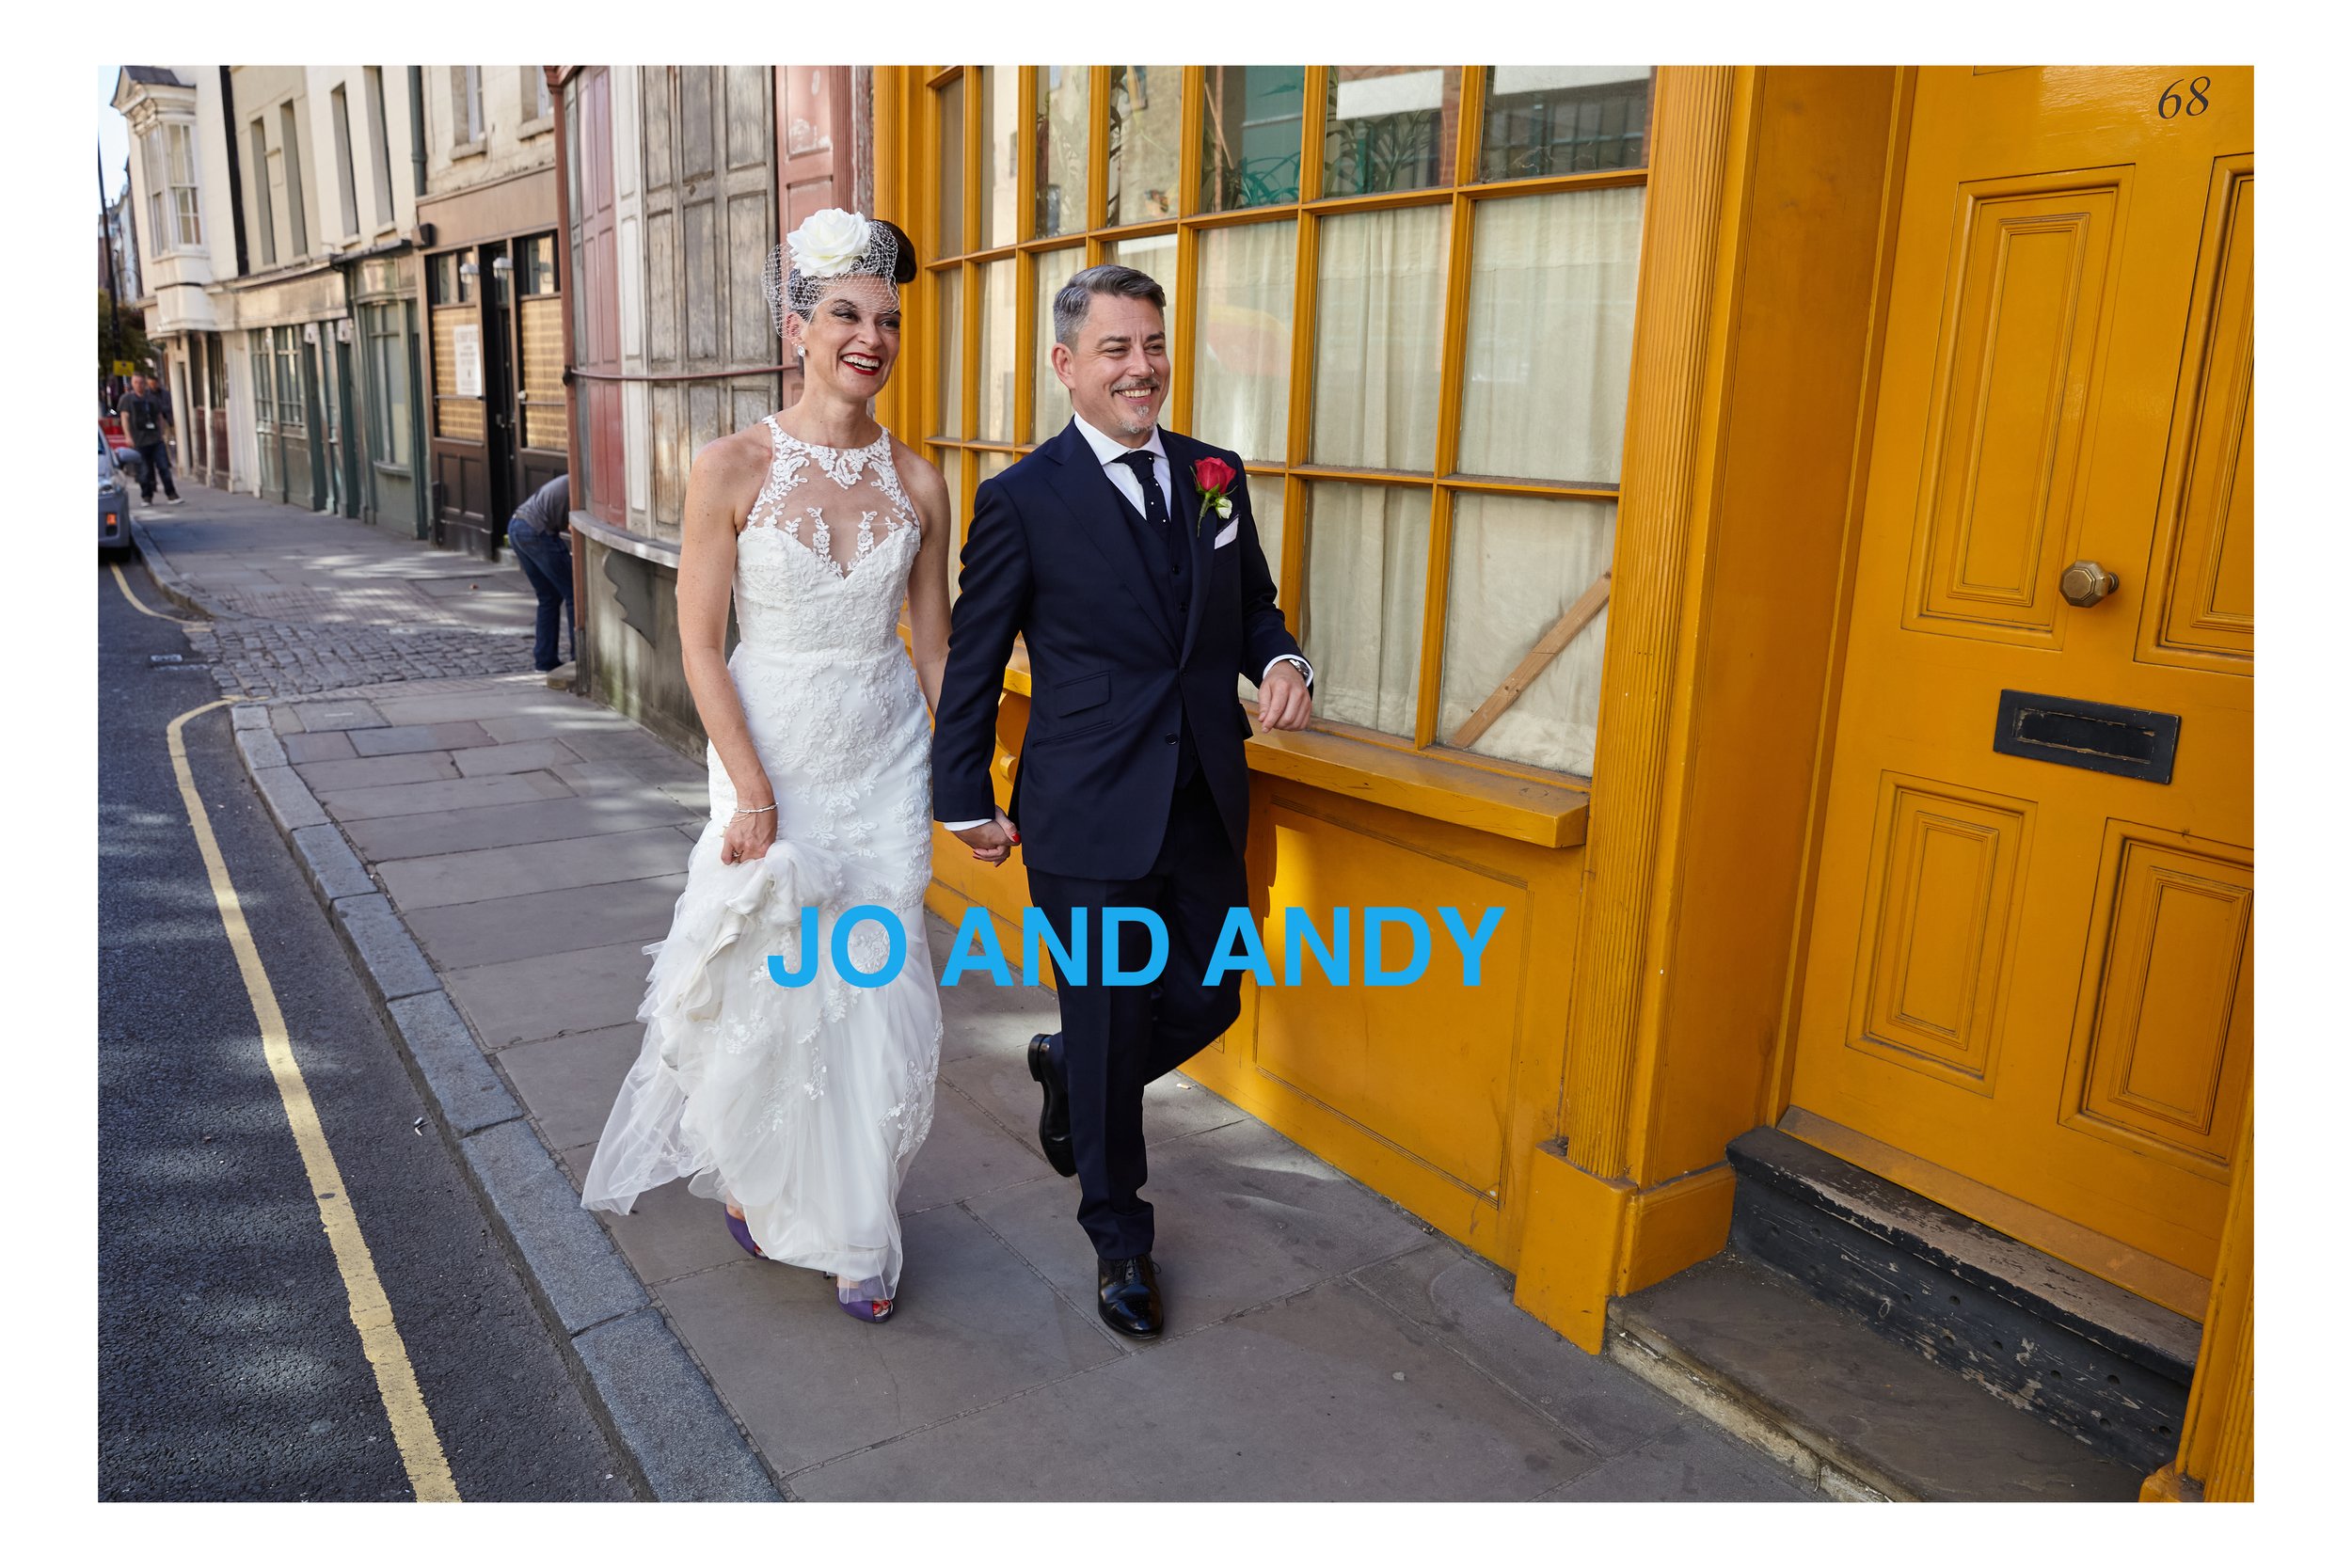 Jo and Andy 1 (Title Card).jpg